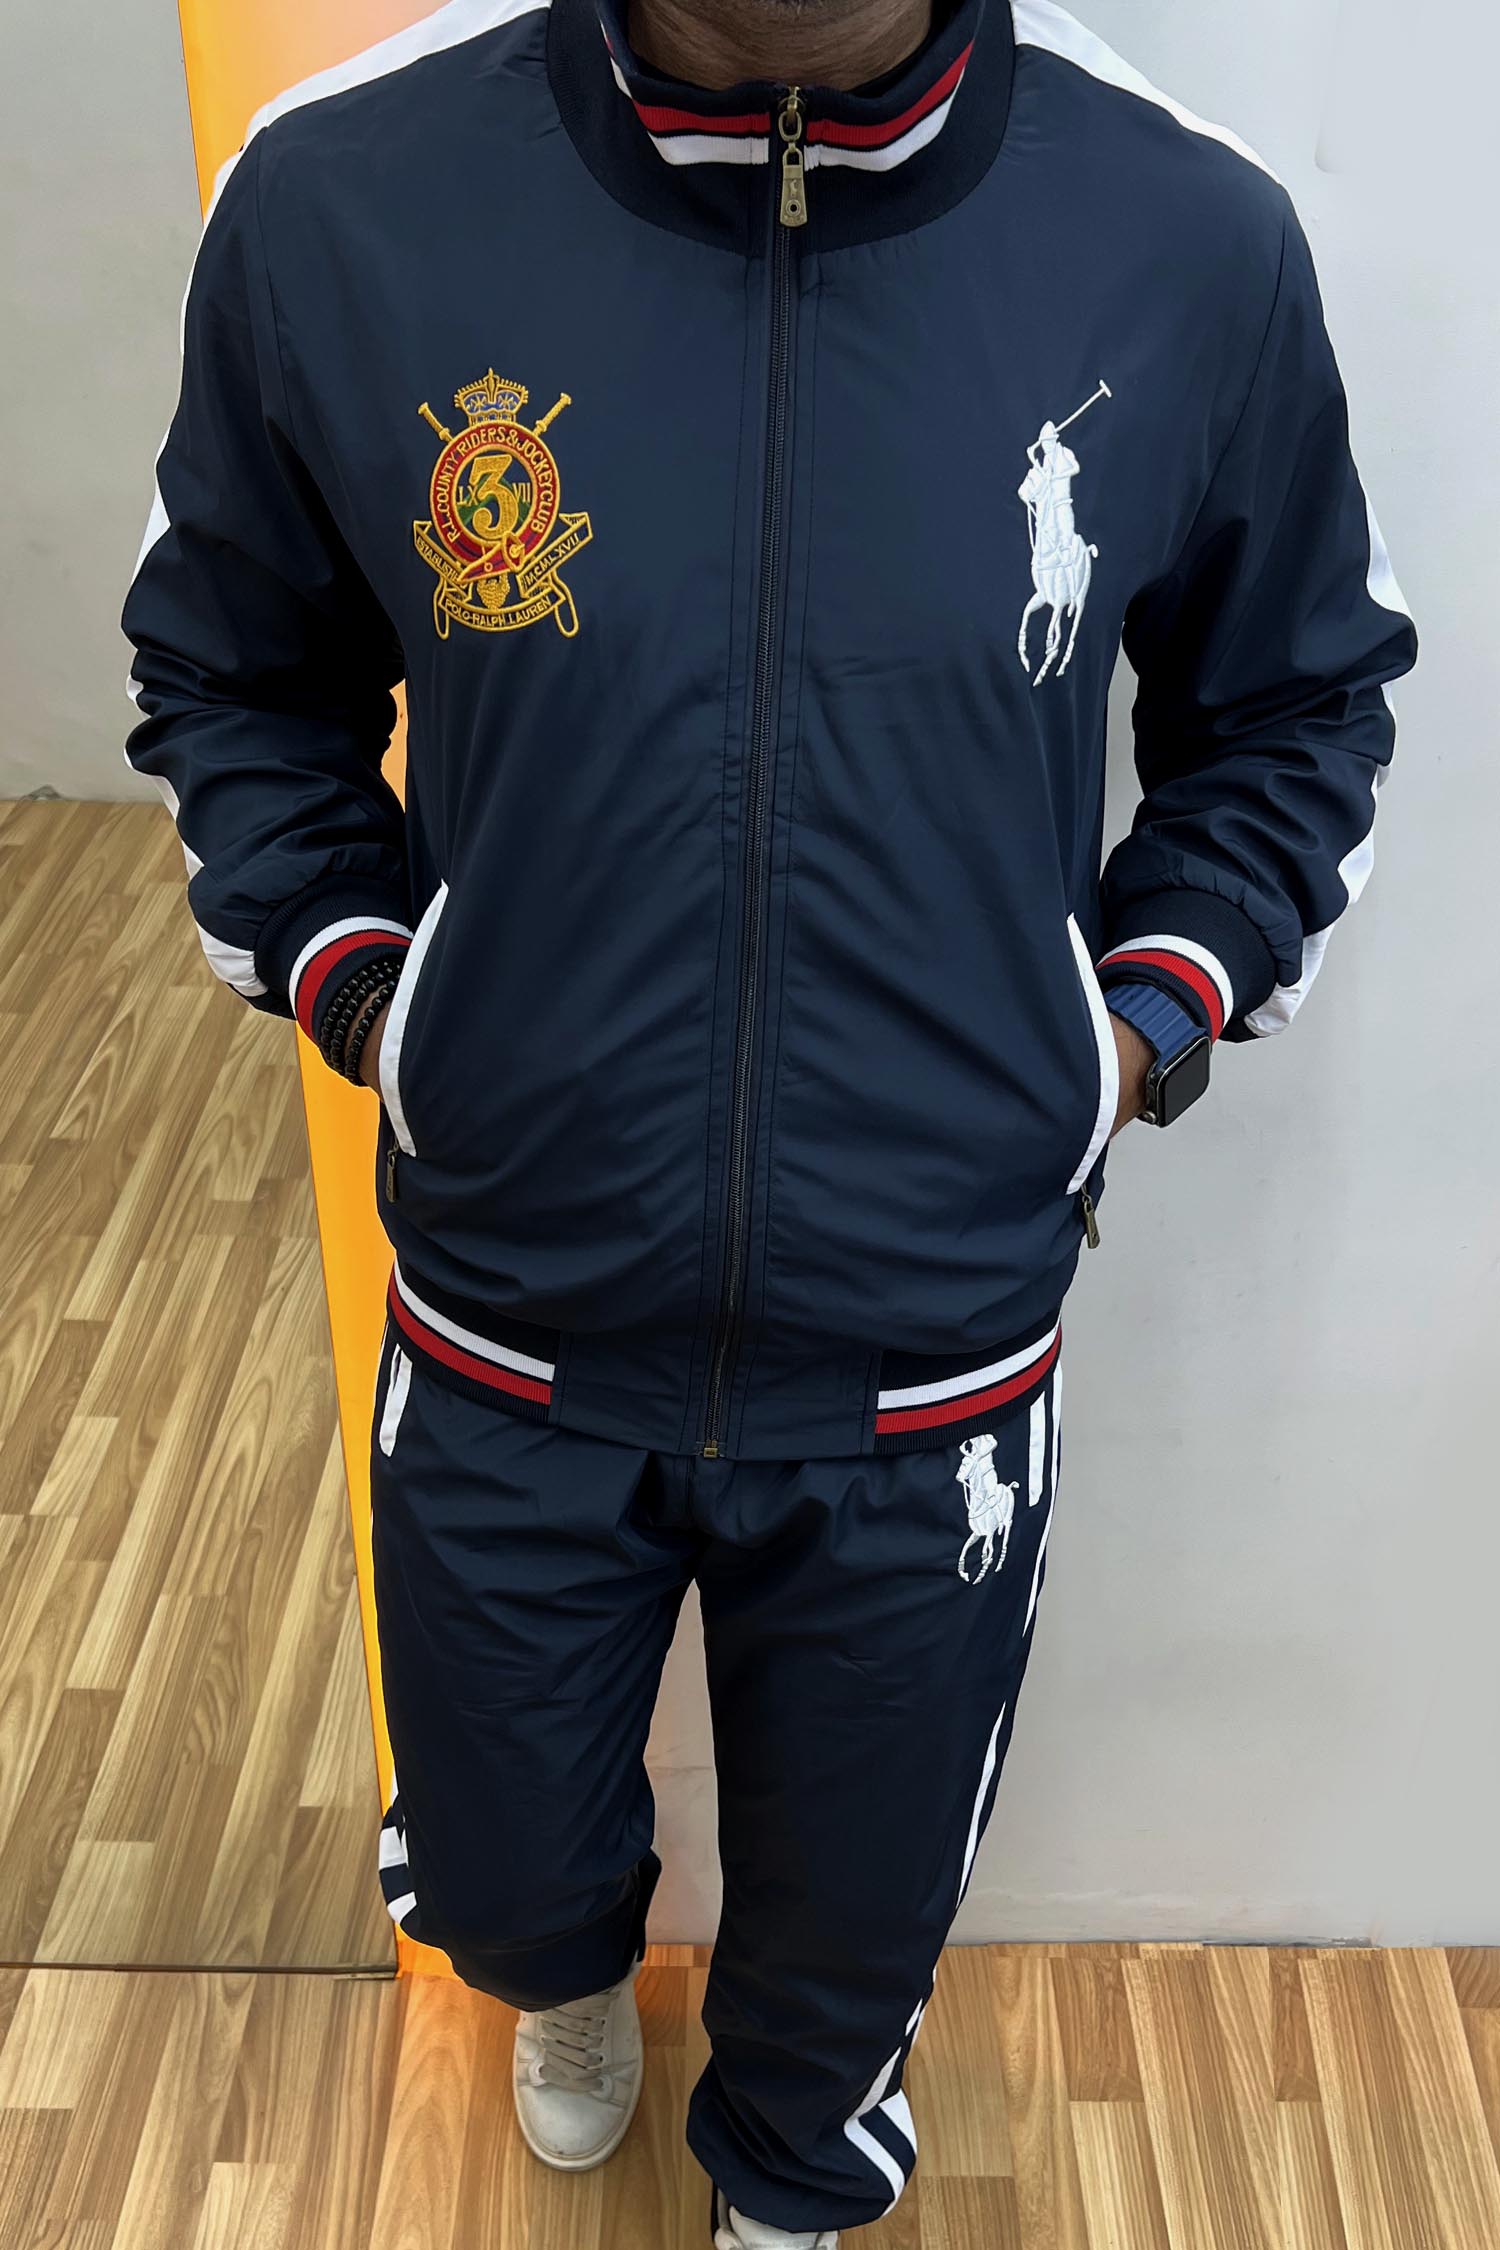 Polo Front Embroidered Logo Zipper Tracksuit